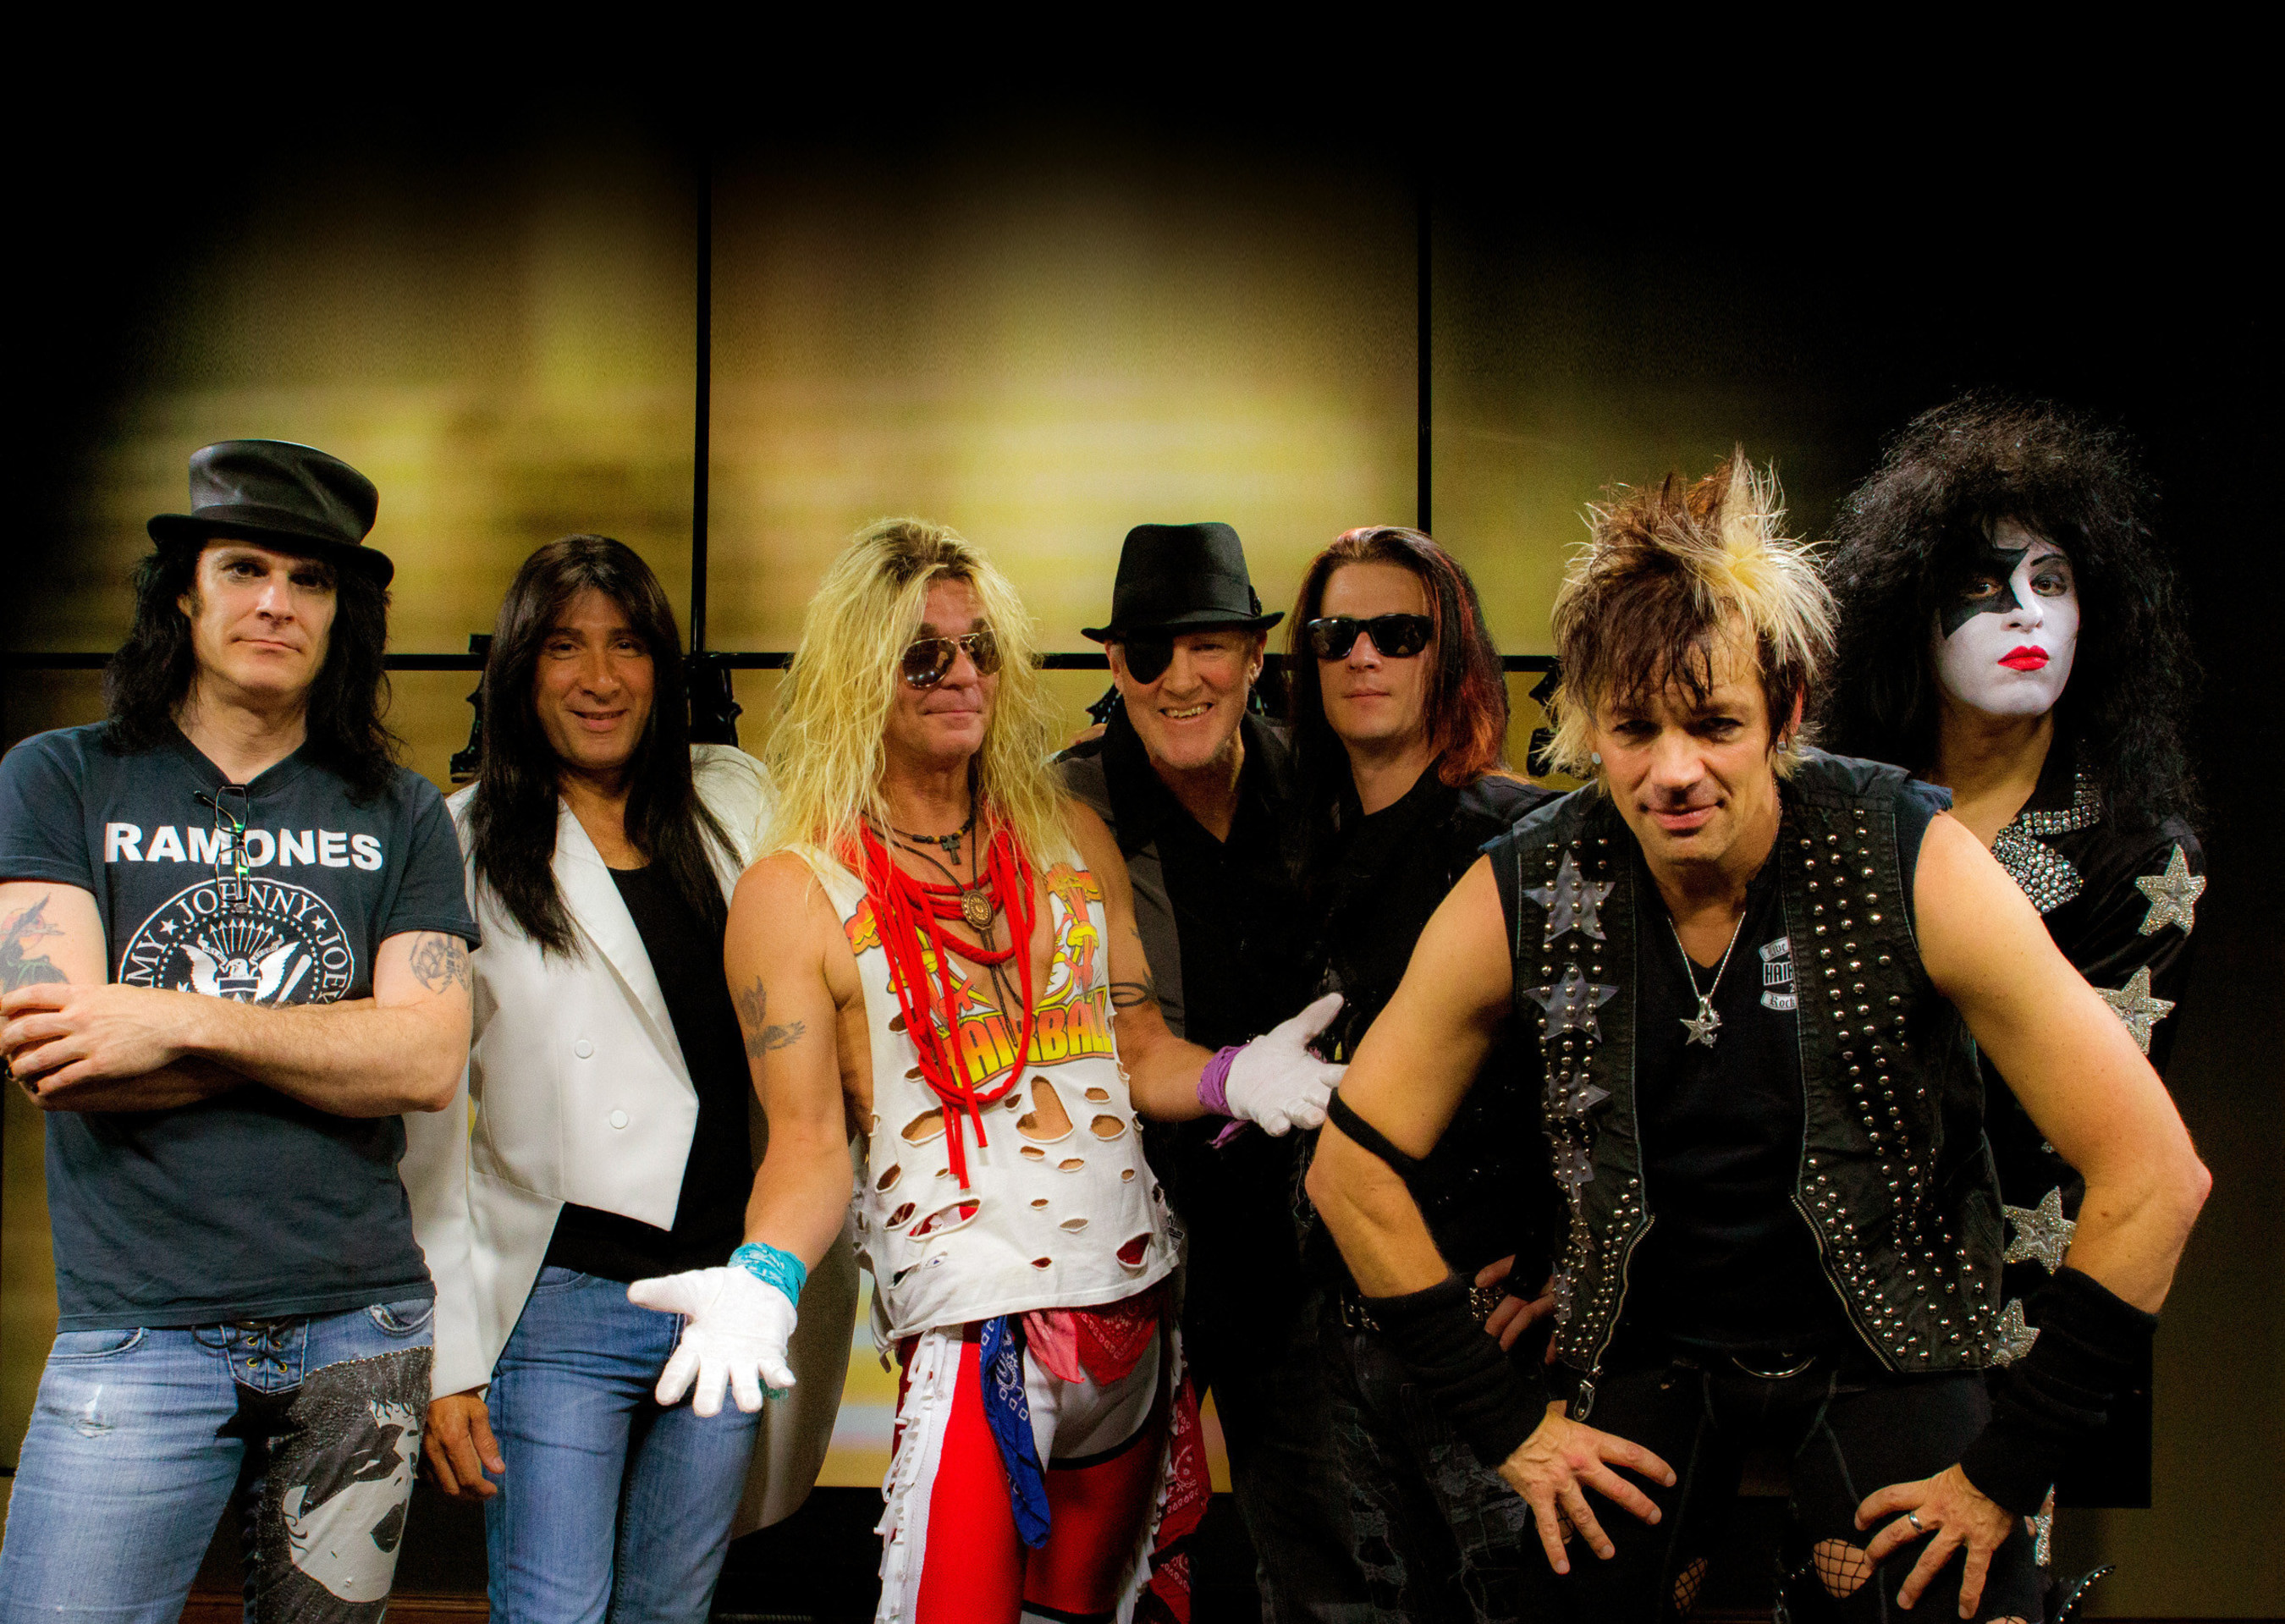 Mike "Chainsaw Caine" Findling and his popular band Hairball have joined Badlands Entertainment Group